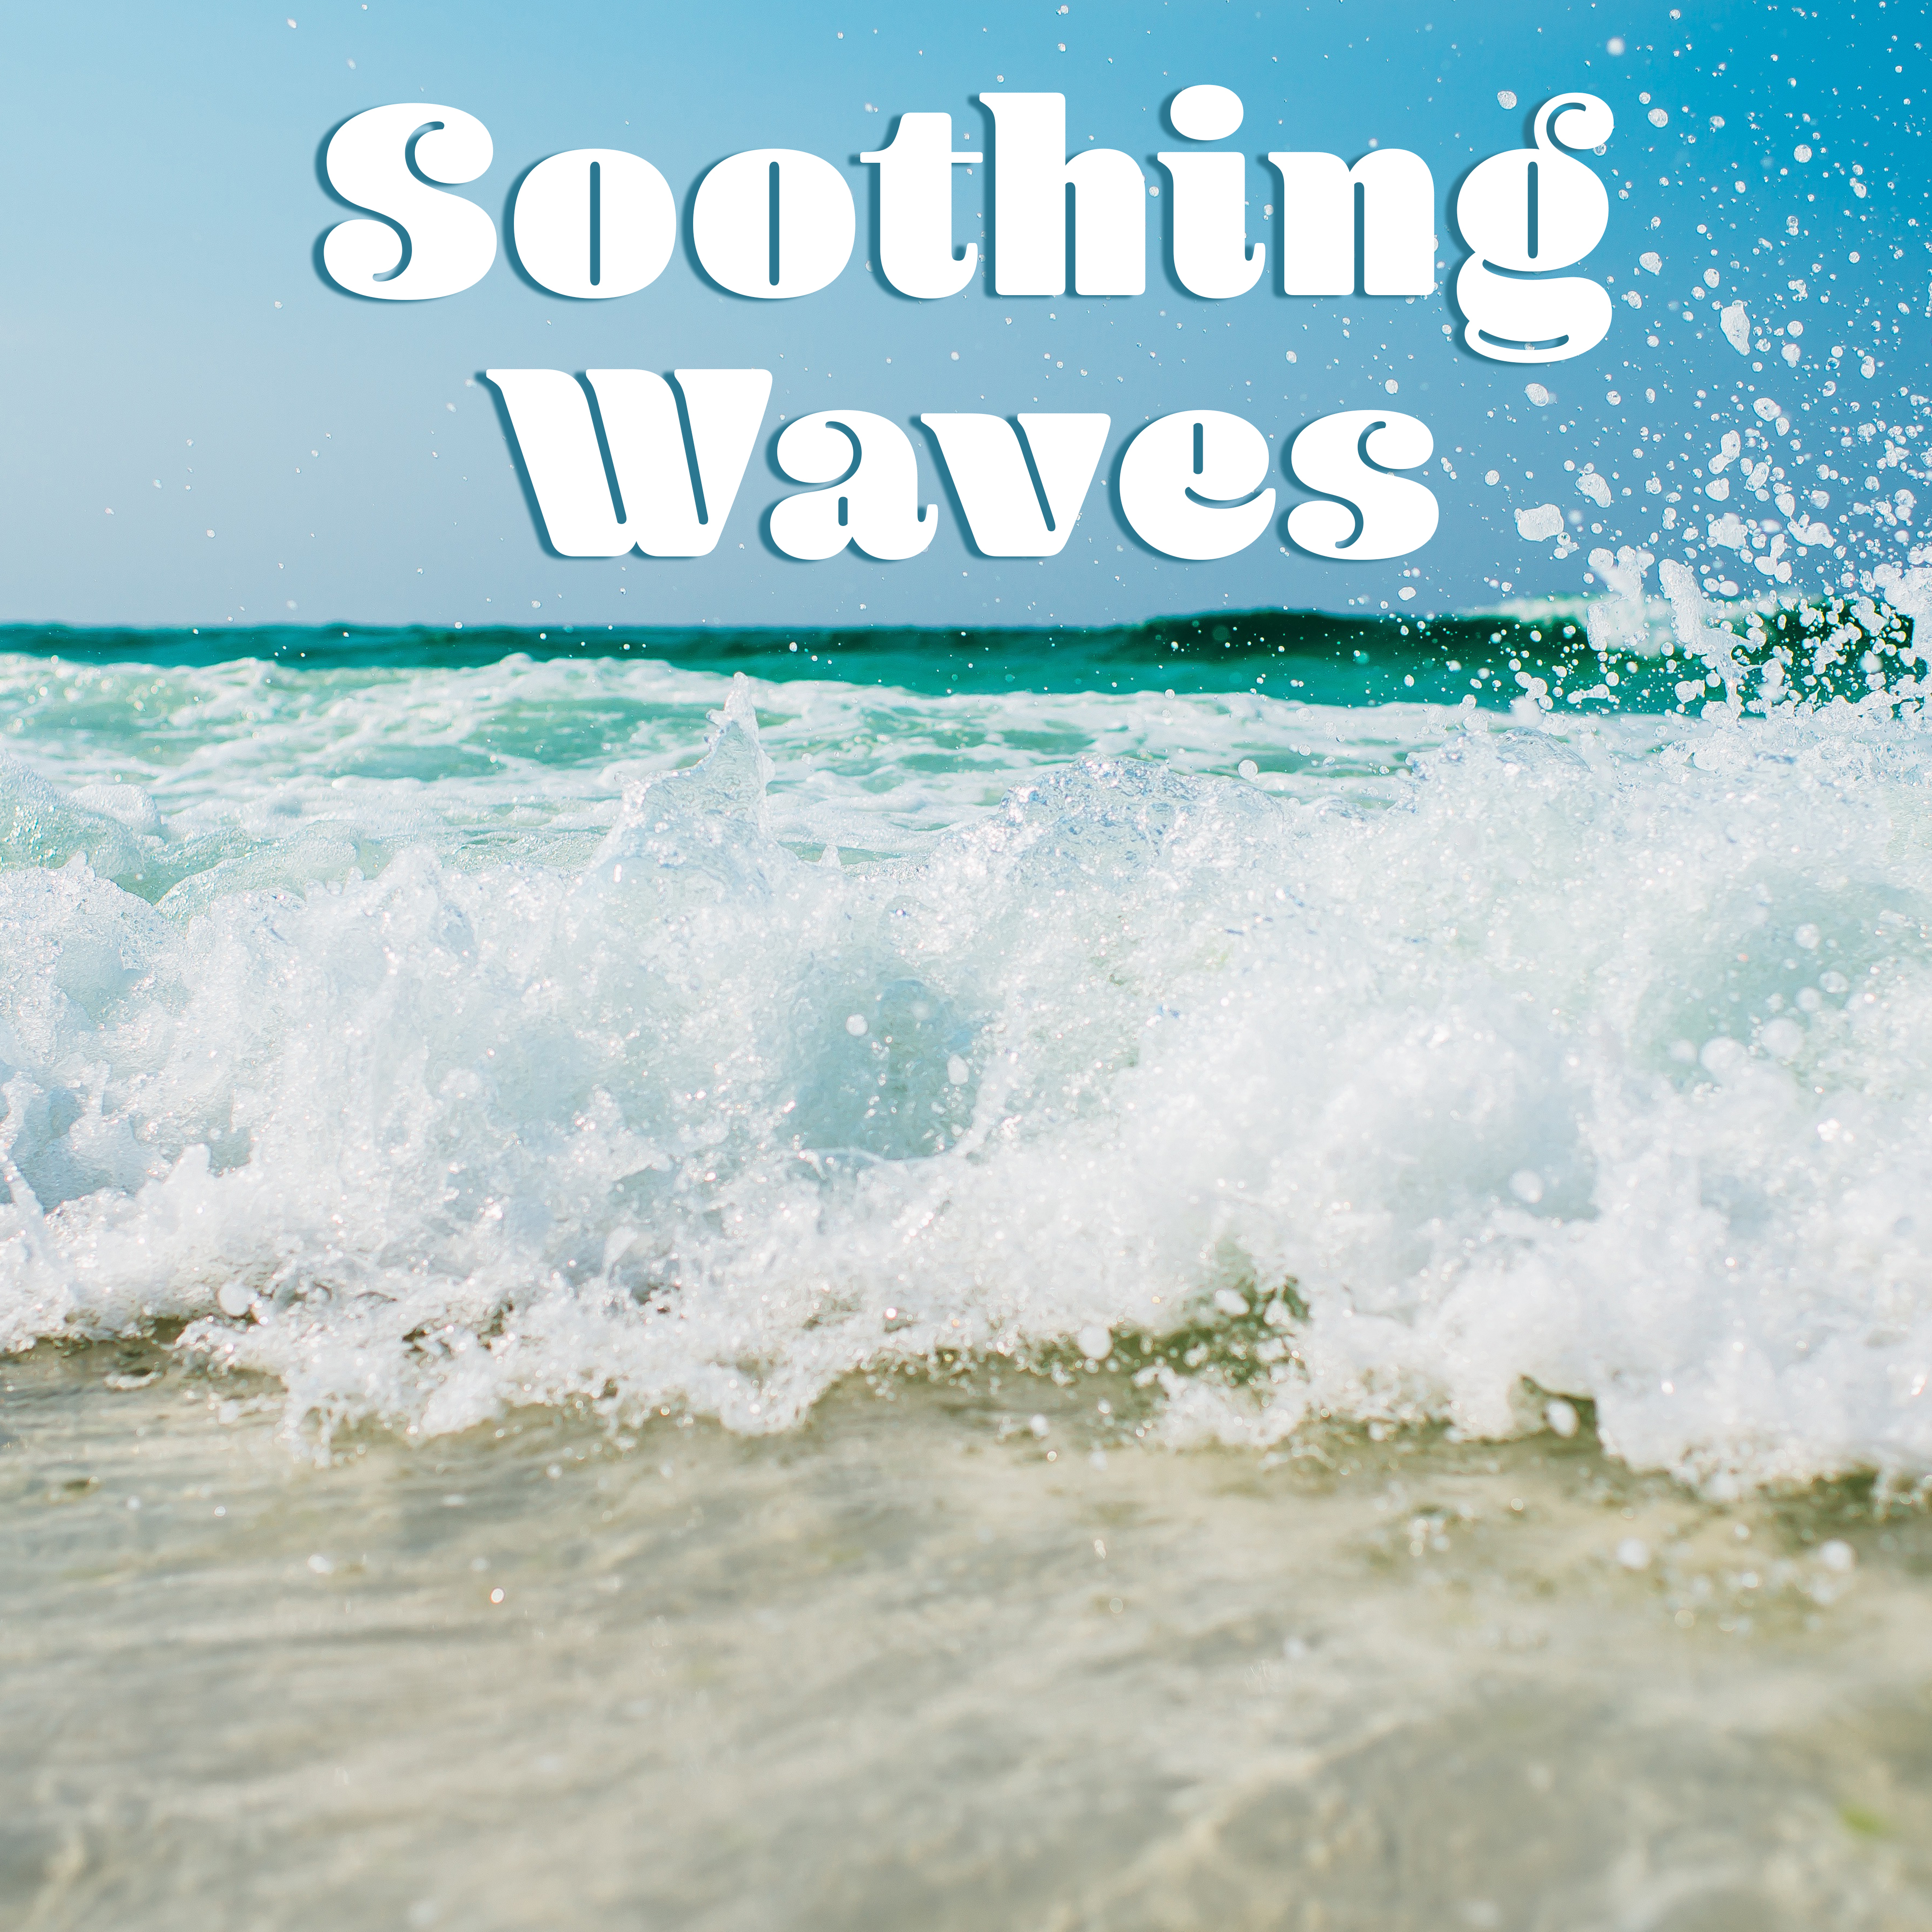 Soothing Waves  Ocean Dreams, Sounds of Sea, Peaceful Mind, Healing Music to Calm Down, Pure Sleep, Relax